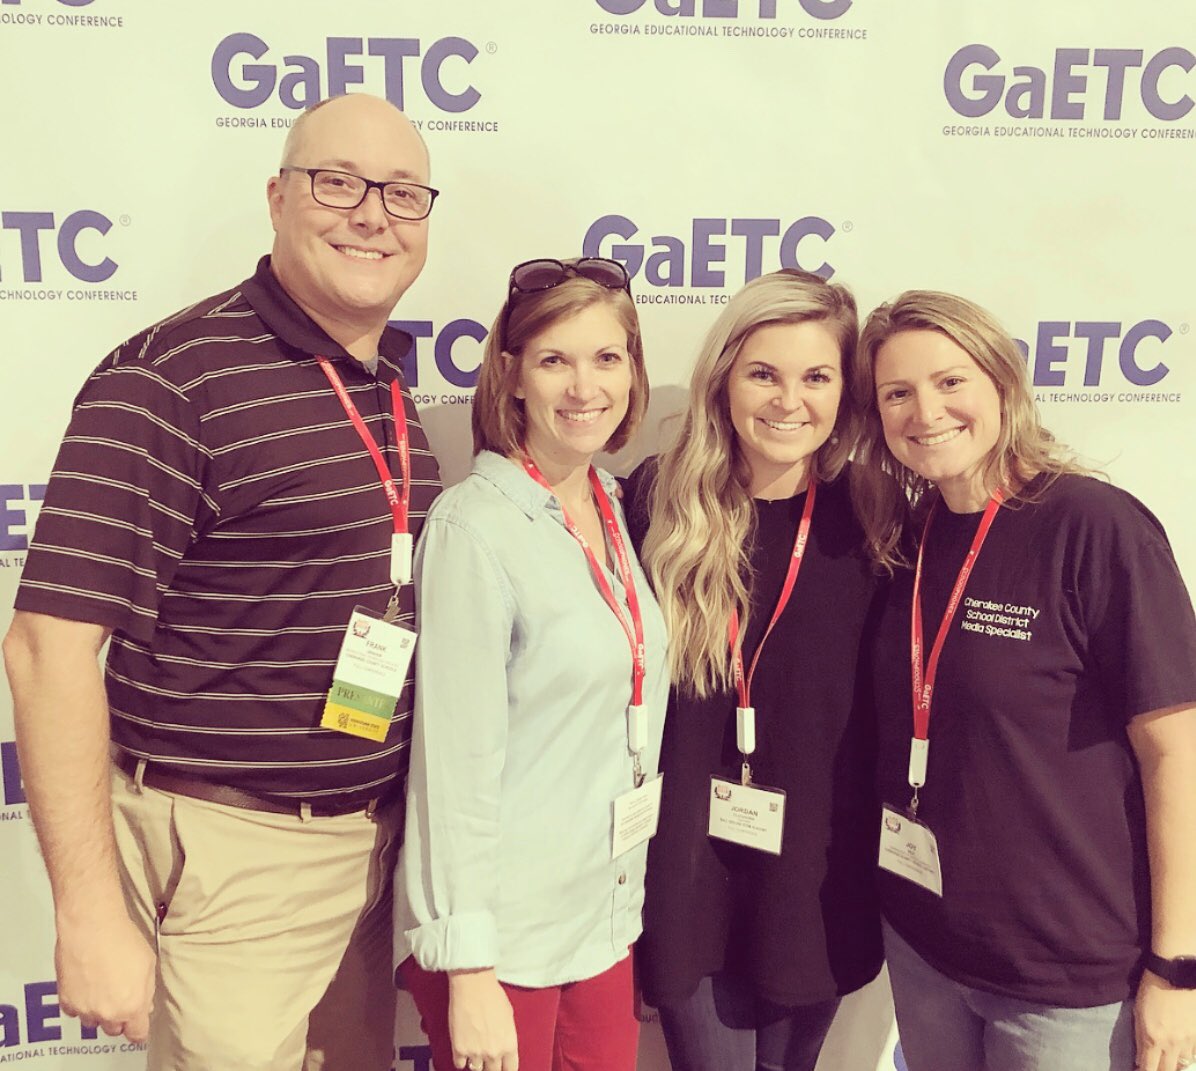 Ran into some of our favorite people @TeamInstaGraham and @joysilk131 at the GaETC Conference! #GaETC19 @CherokeeSchools